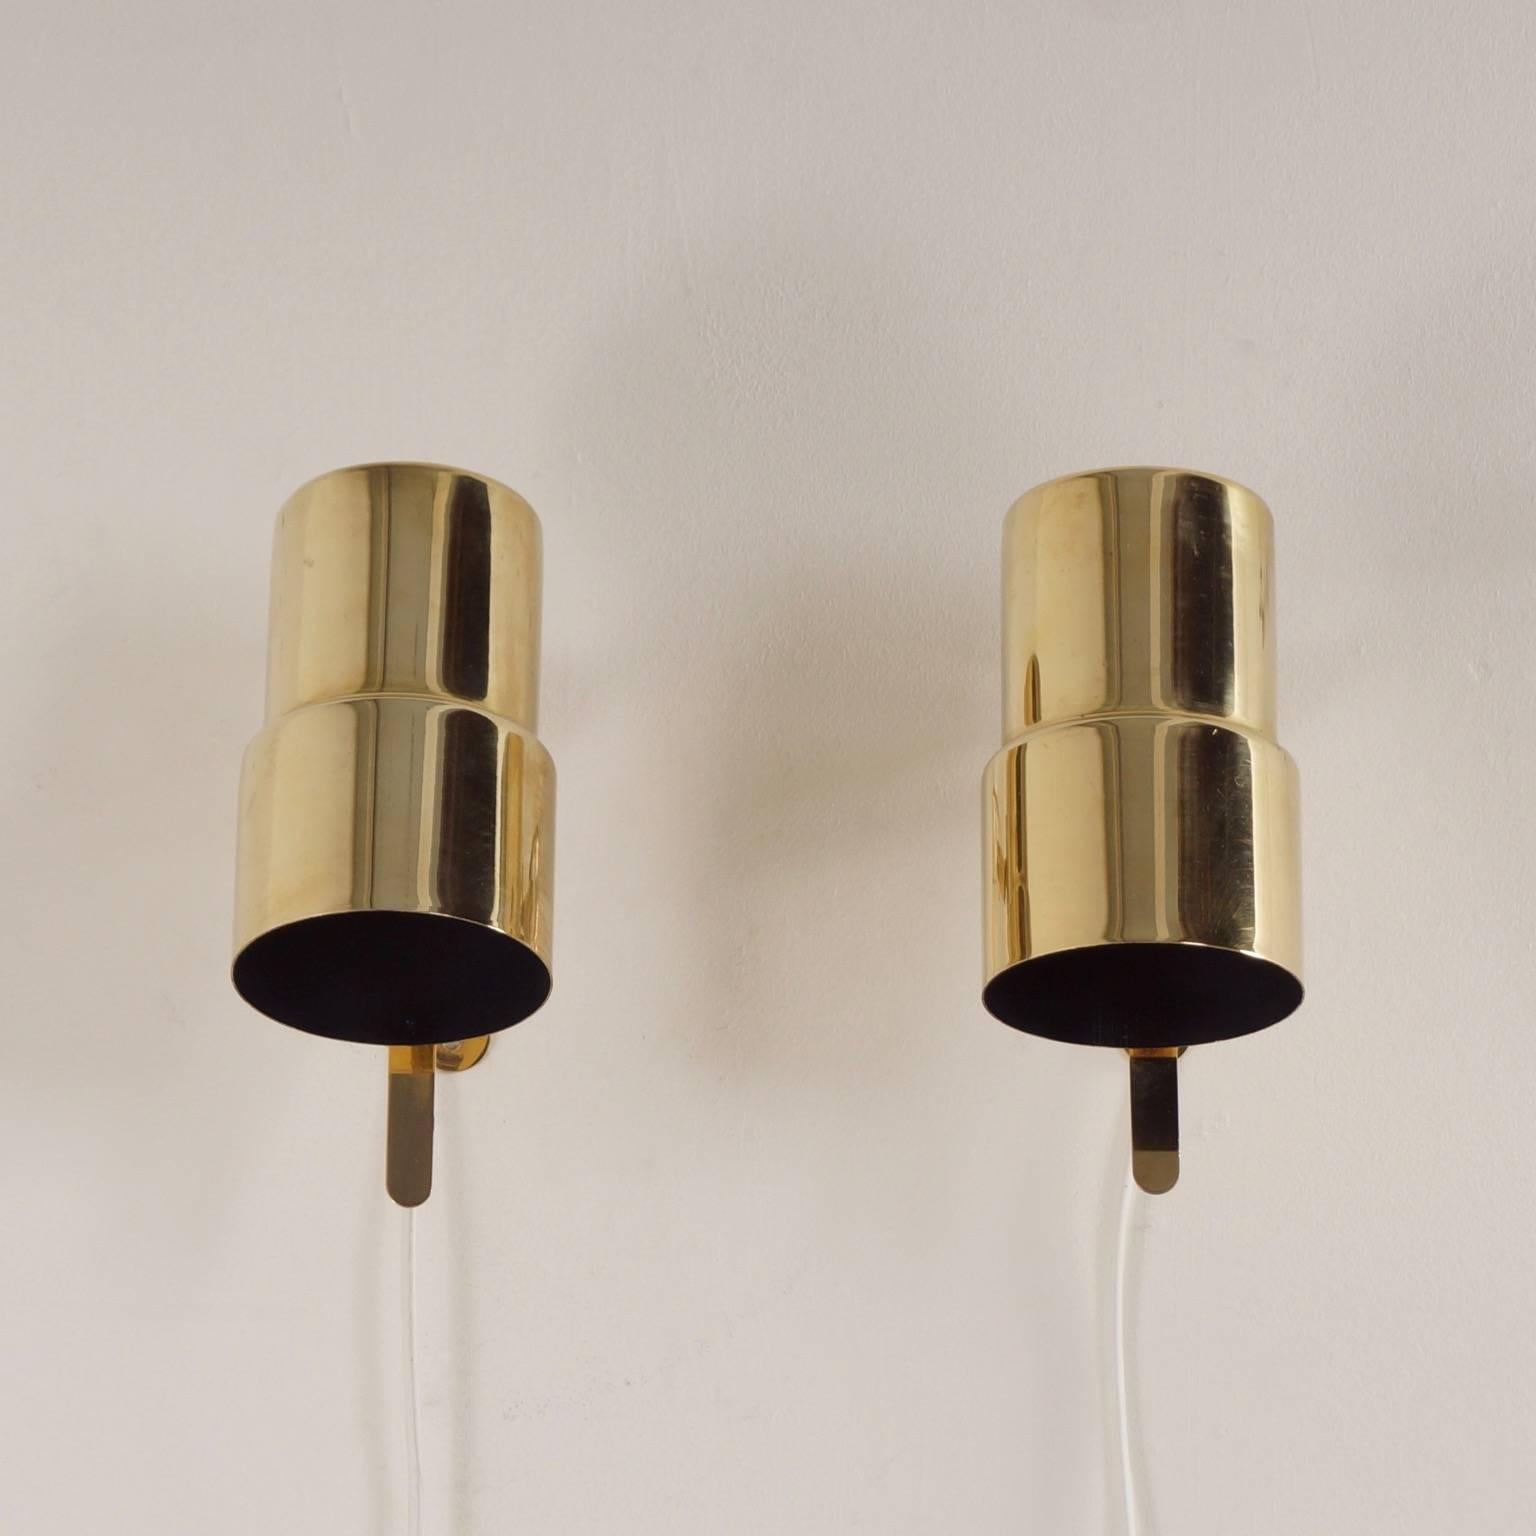 Scandinavian Modern Brass Wall Lamps by Hans Agne Jakobsson for AB Markaryd, Set of Two, 1970s